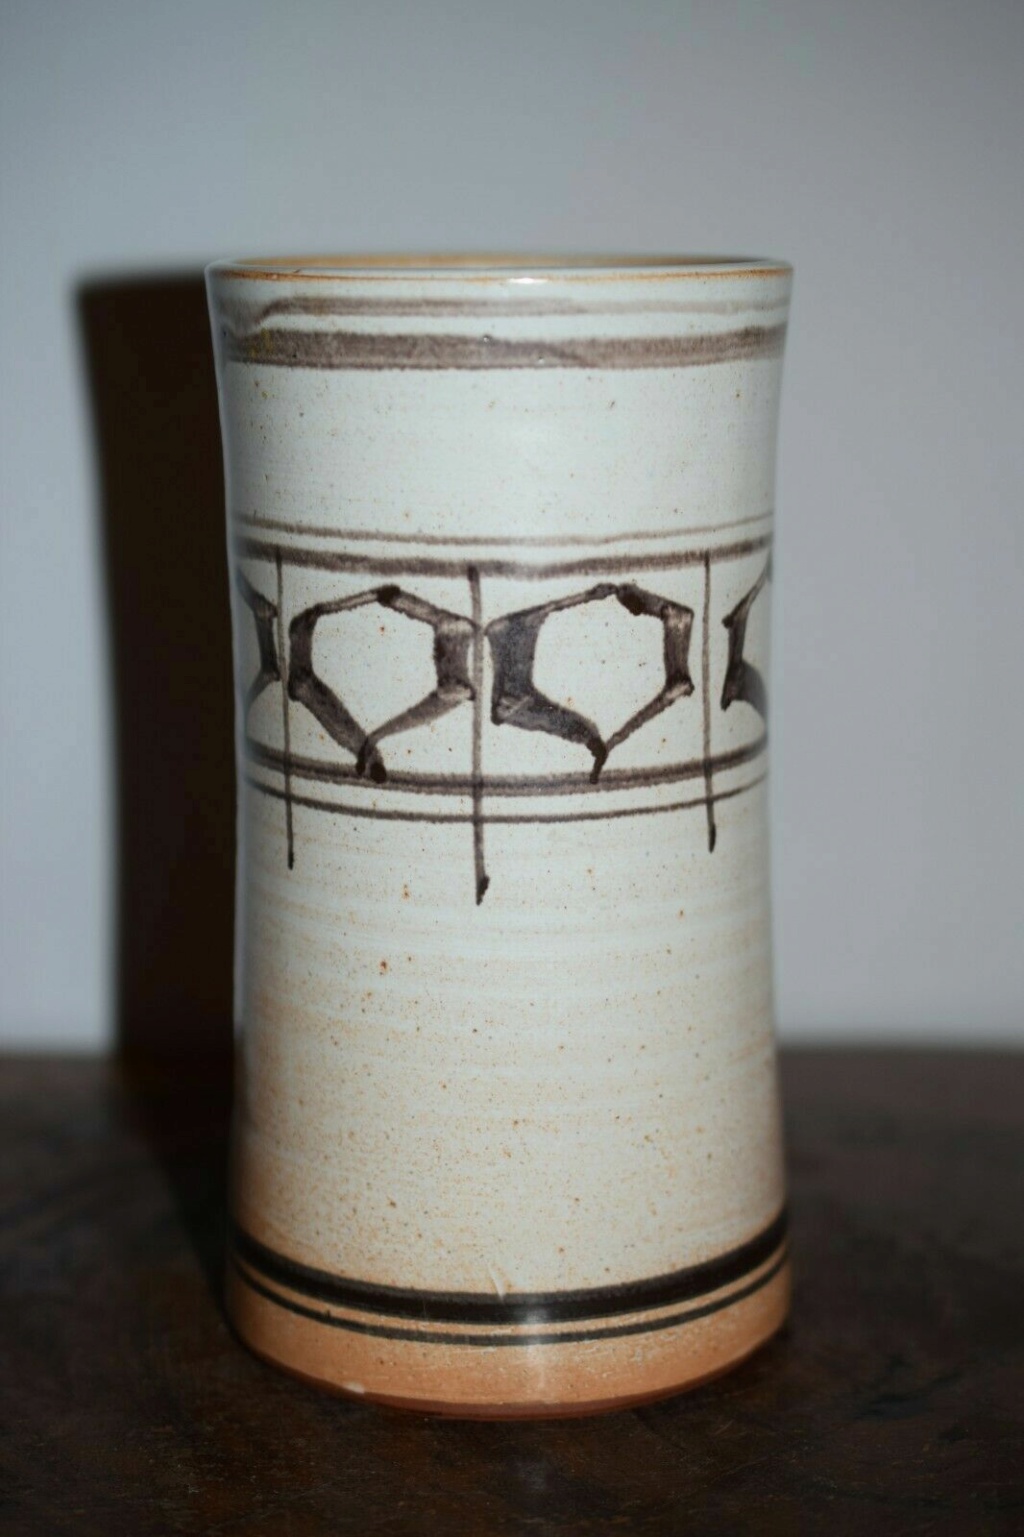 Vase with TM mark, not Matthew Tyas - - possibly Margaret Murray Teasdale  111